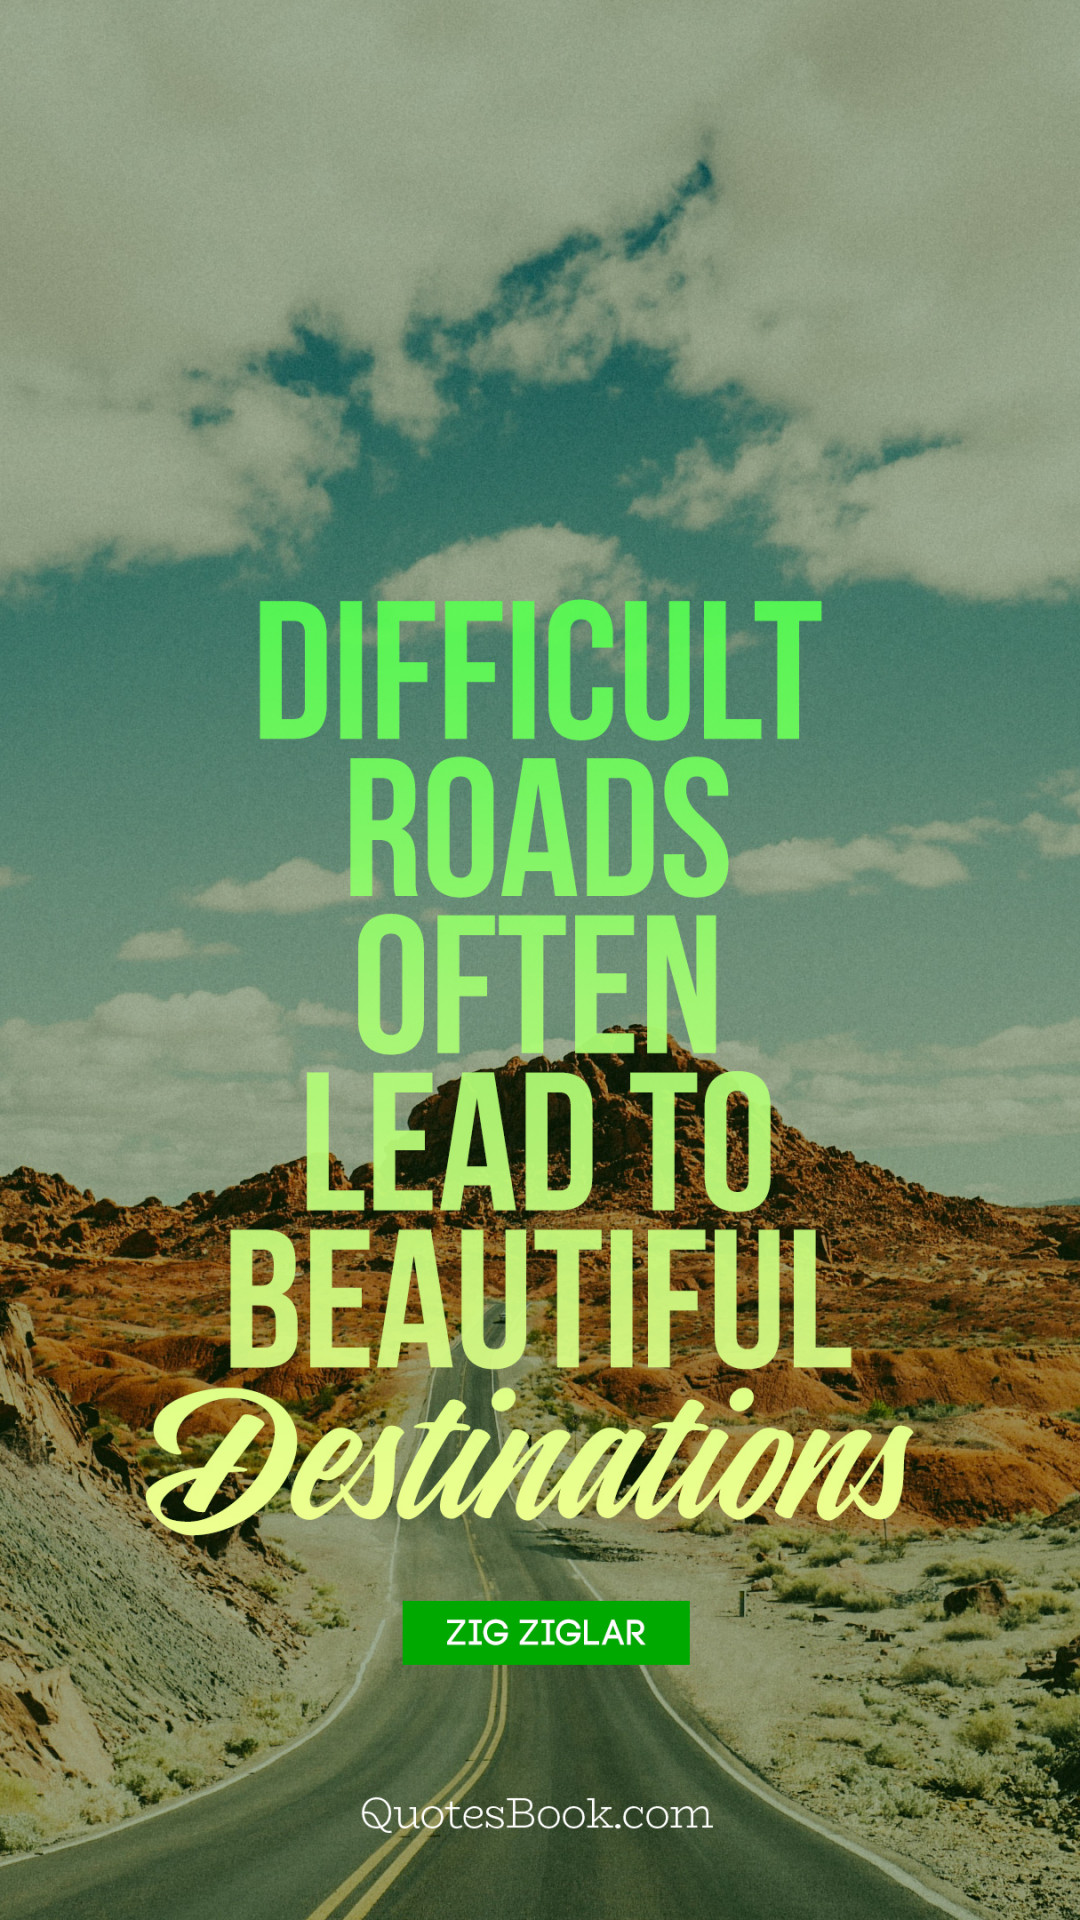 Difficult roads often lead to beautiful destinations - QuotesBook